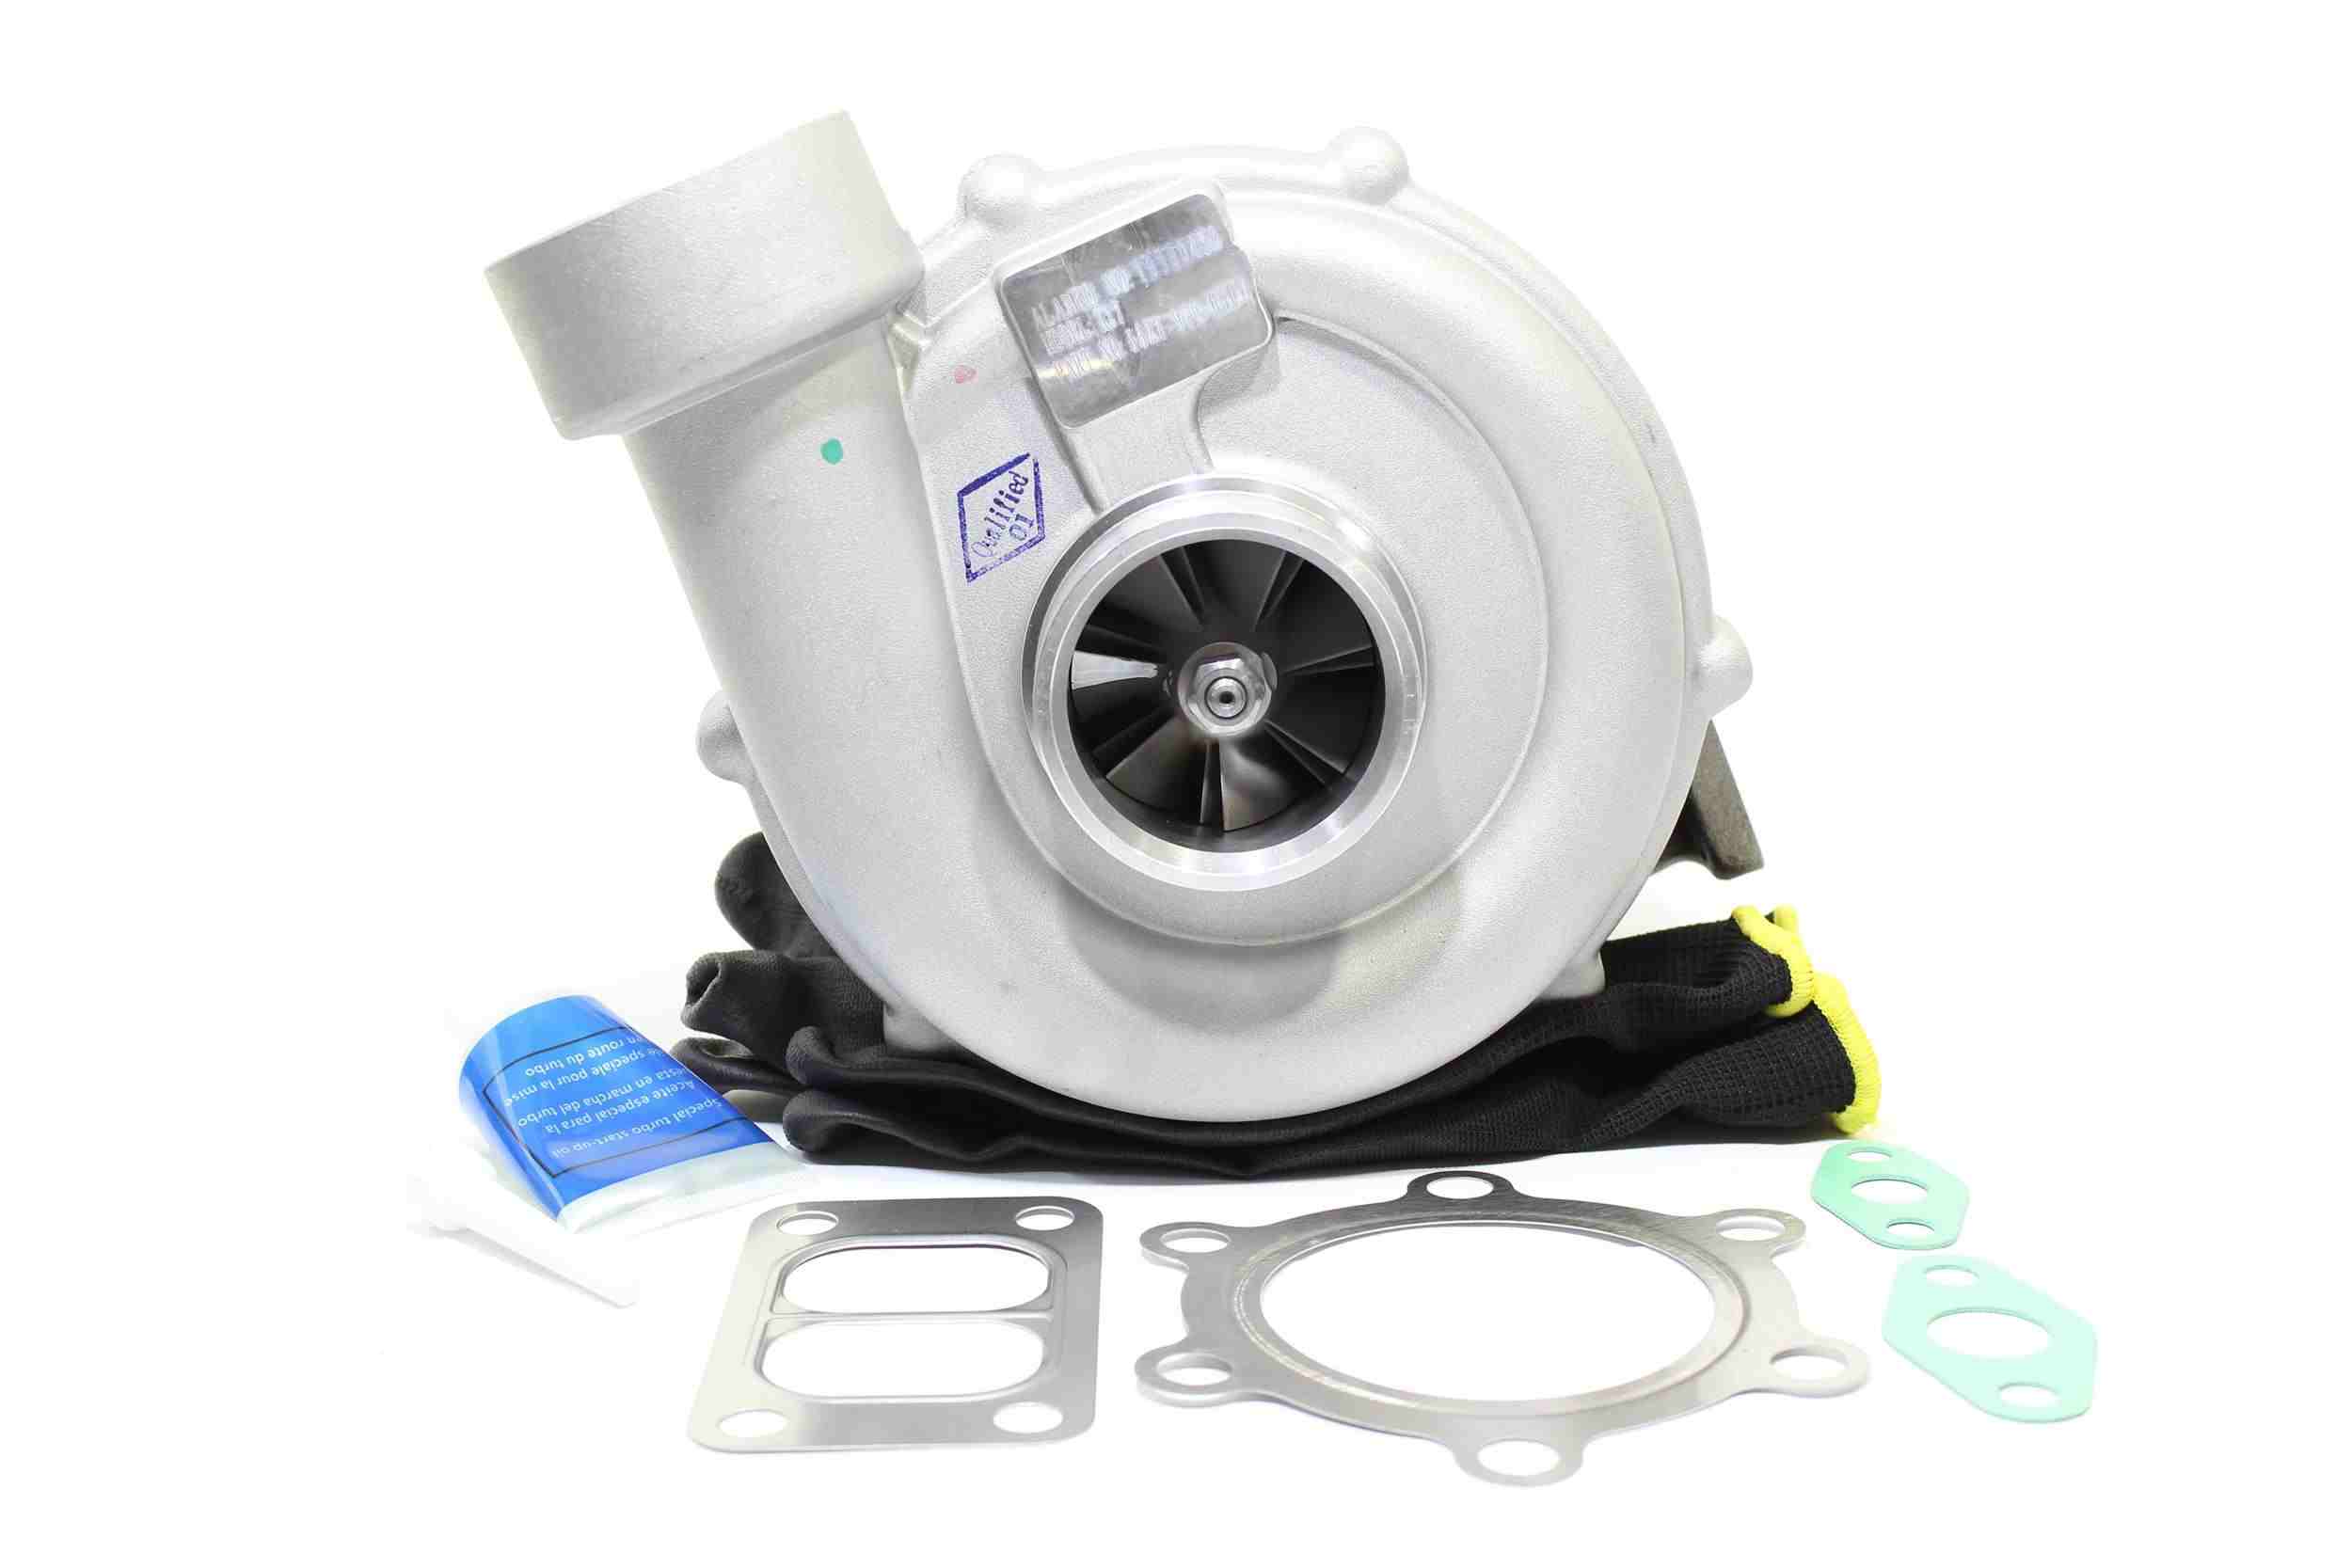 ALANKO 10900472 Turbocharger Exhaust Turbocharger, Incl. Gasket Set, with attachment material